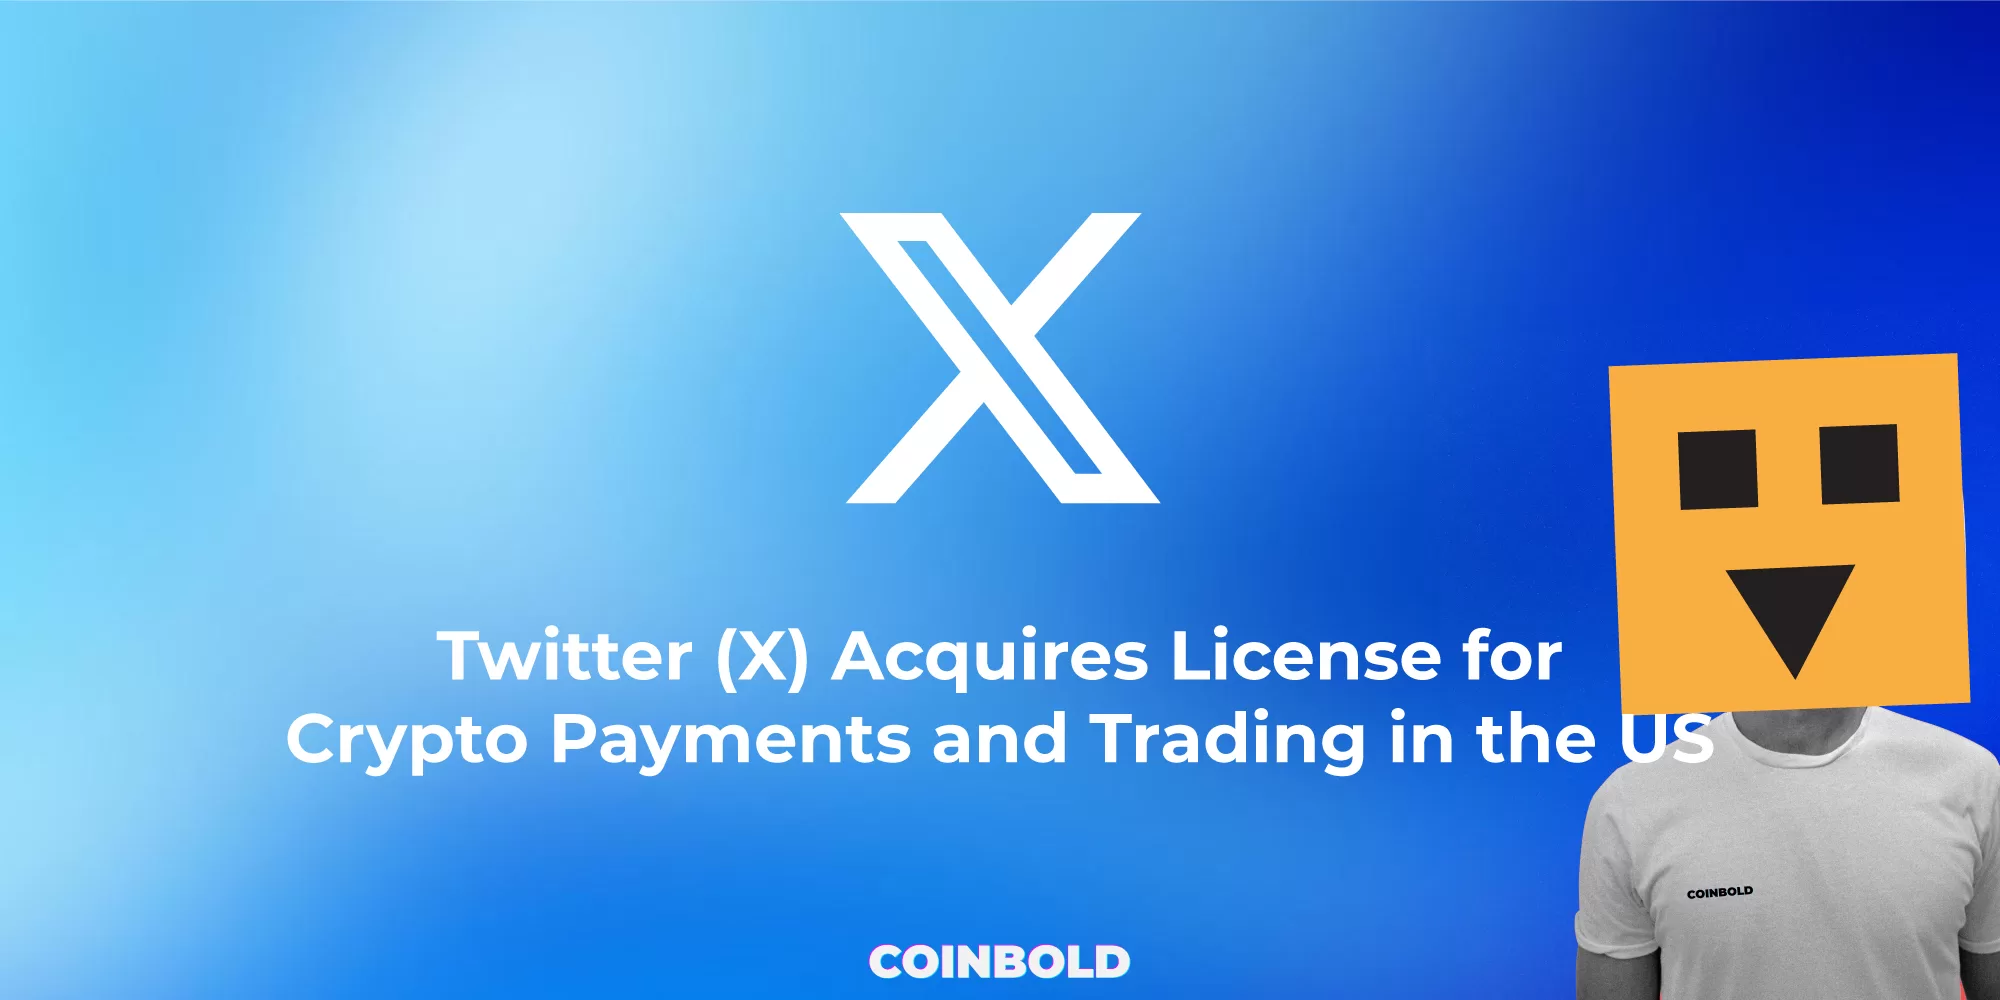 Twitter (X) Acquires License for Crypto Payments and Trading in the US